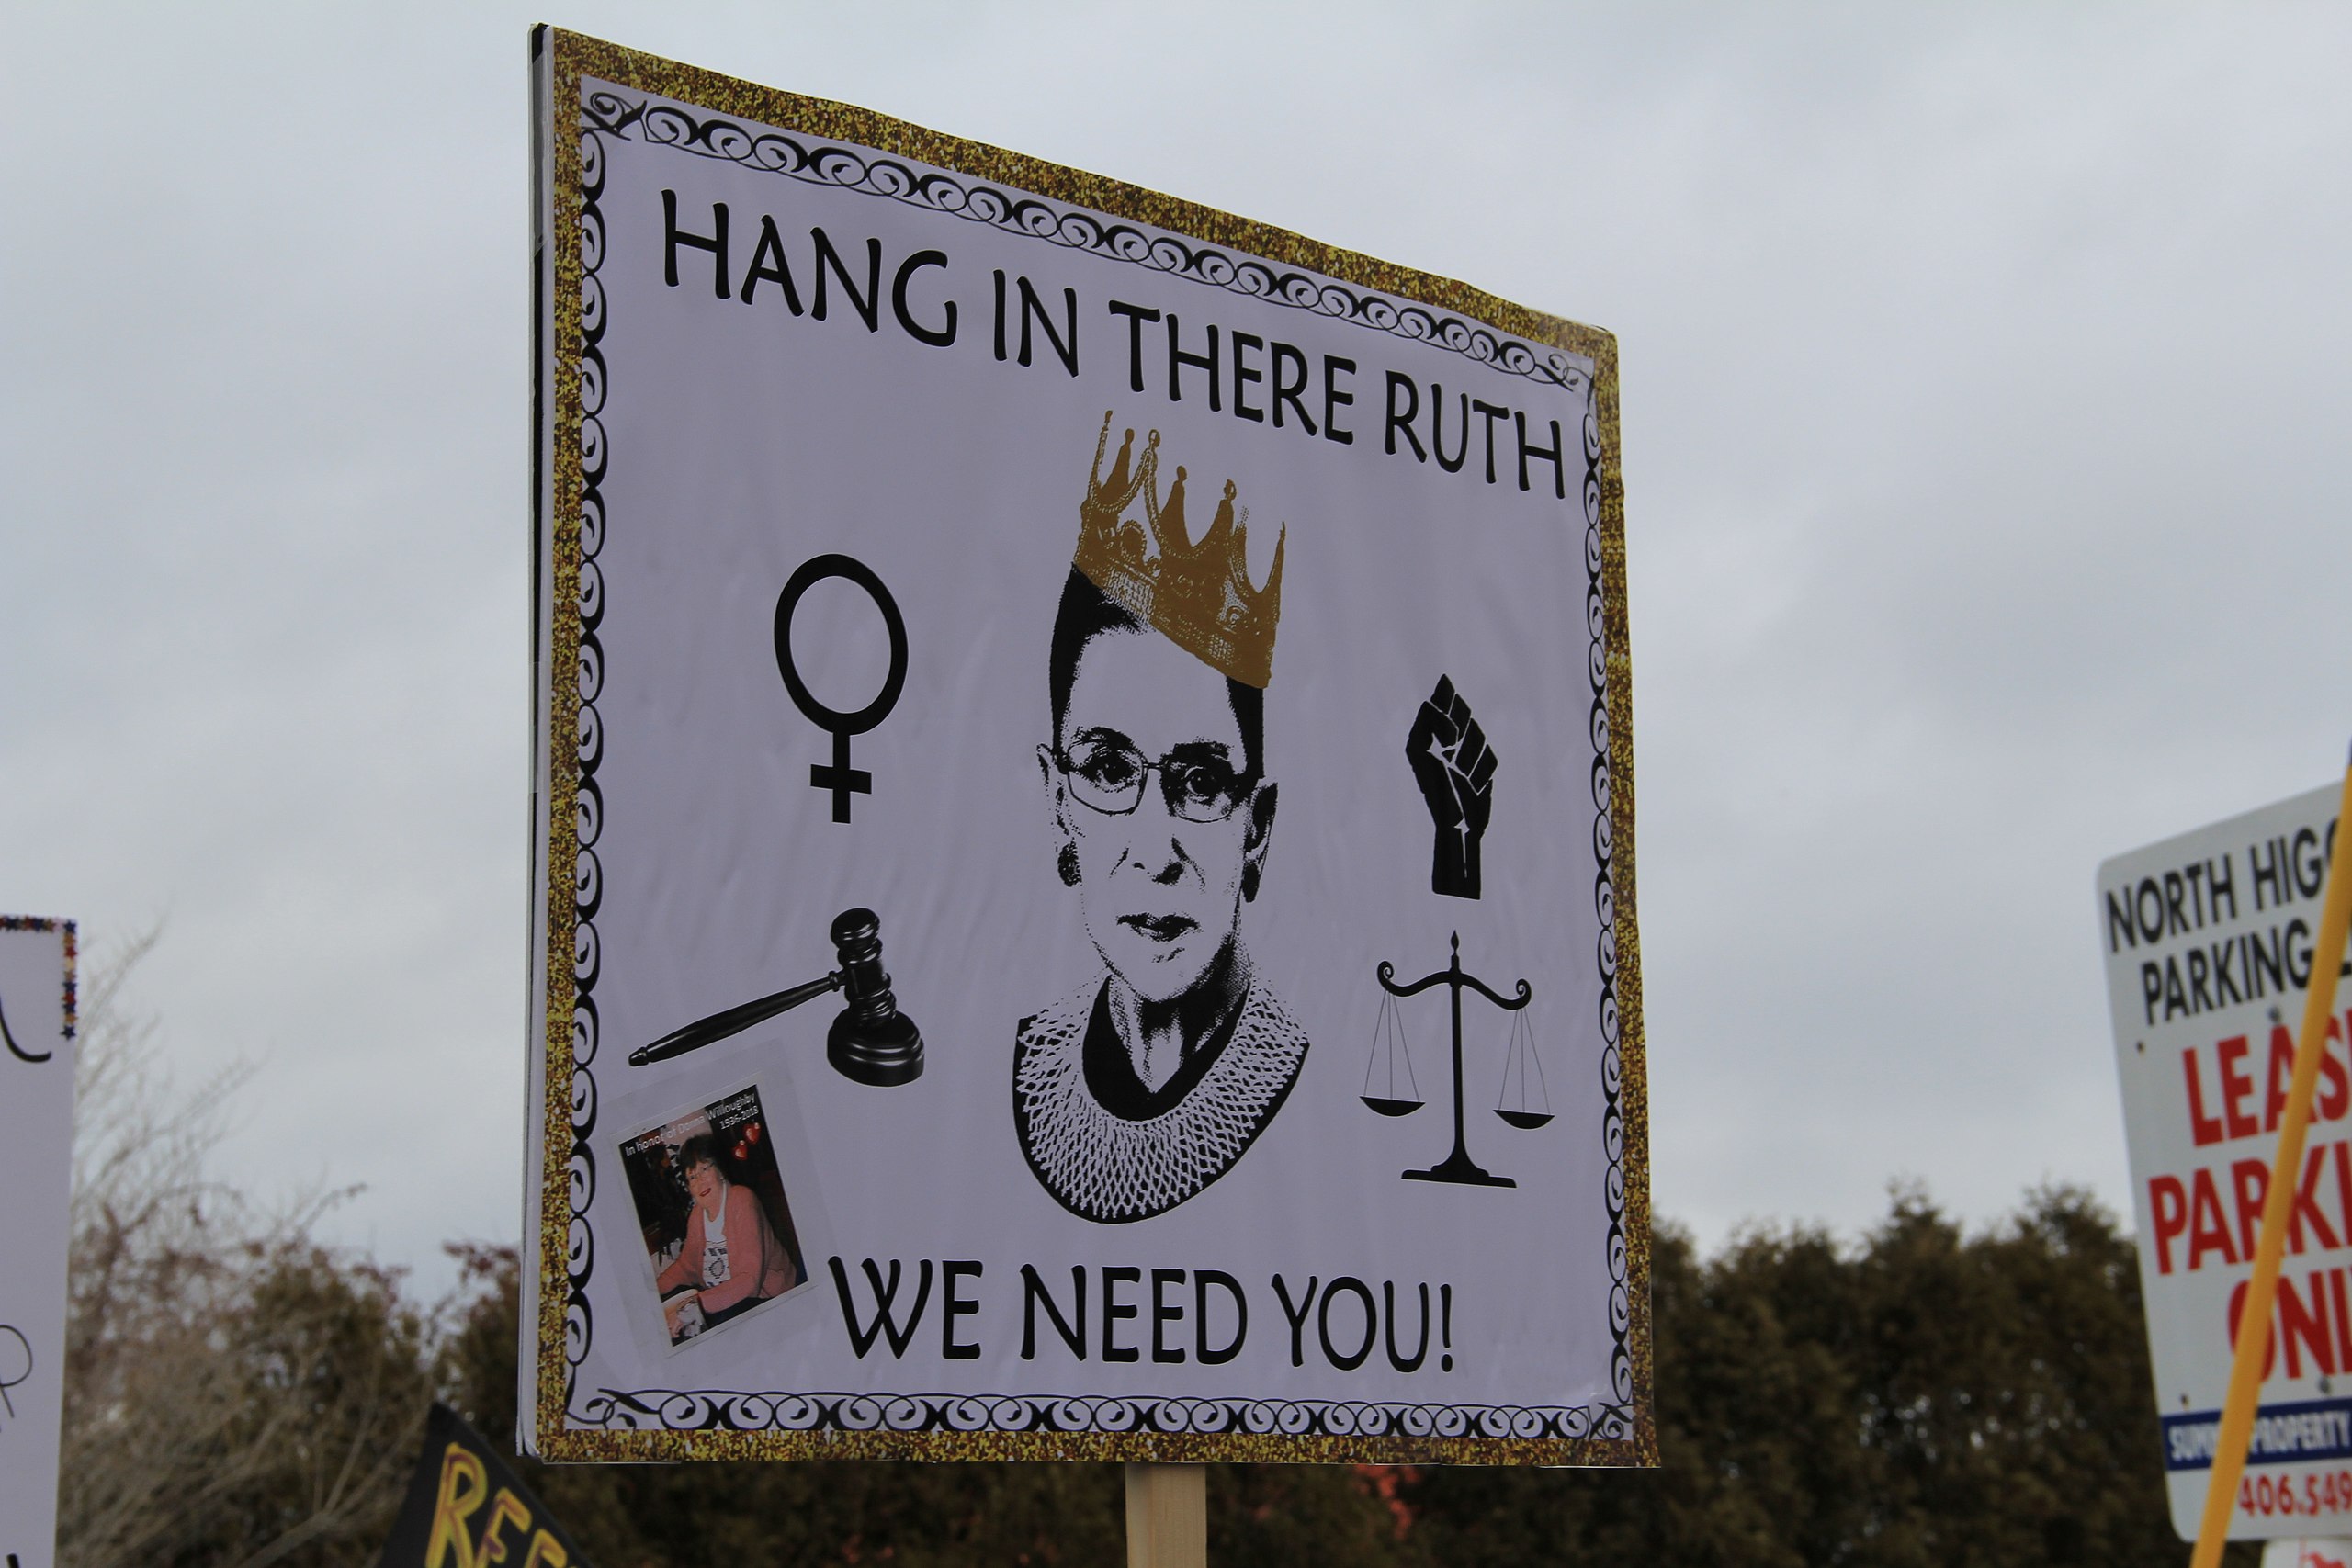 Photograph taken at a 2018 Women's March in Missoula, Montana, showing a sign with a graphic of Supreme Court Justice Ruth Bader Ginsberg in a crown and the words "Hang in there Ruth, we need you!" Photograph taken by Wikimedia user Montanasuffragettes. 